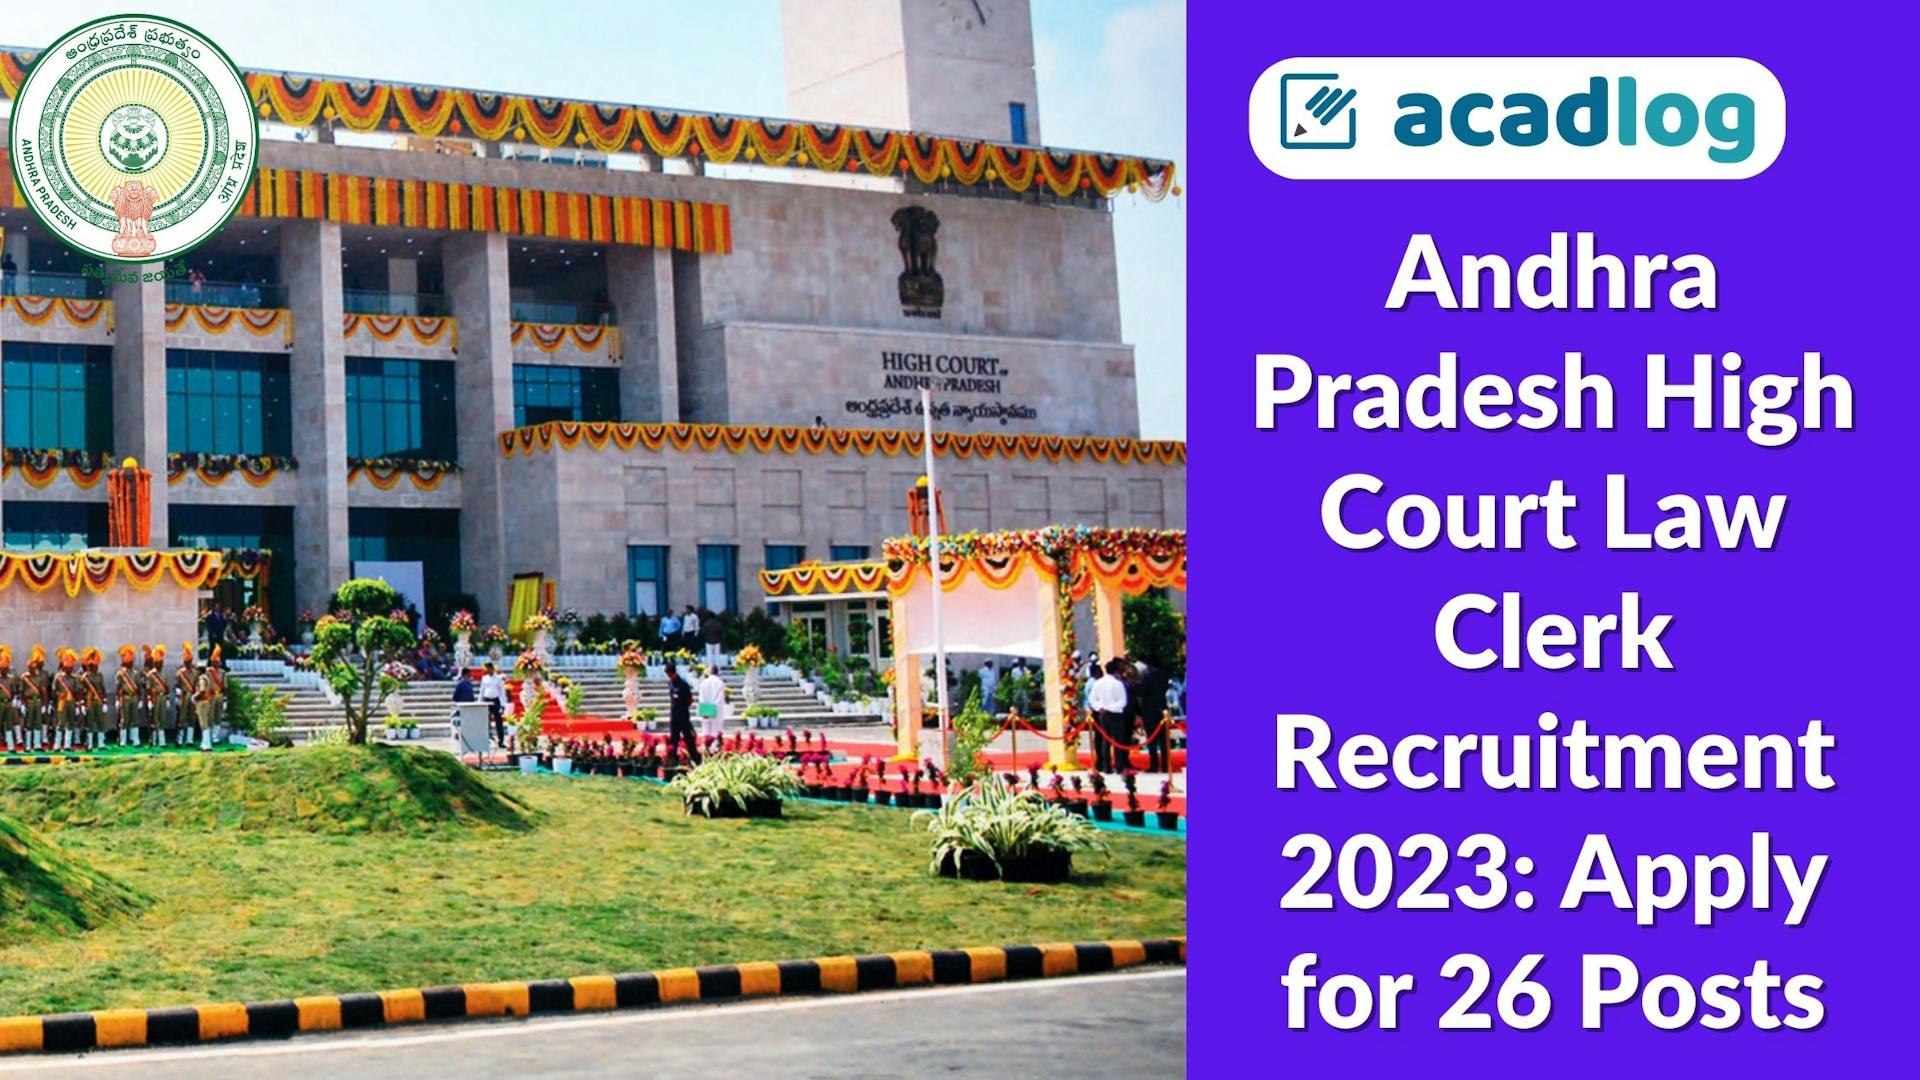 Andhra Pradesh High Court Law Clerk Recruitment 2023: Apply for 26 Posts